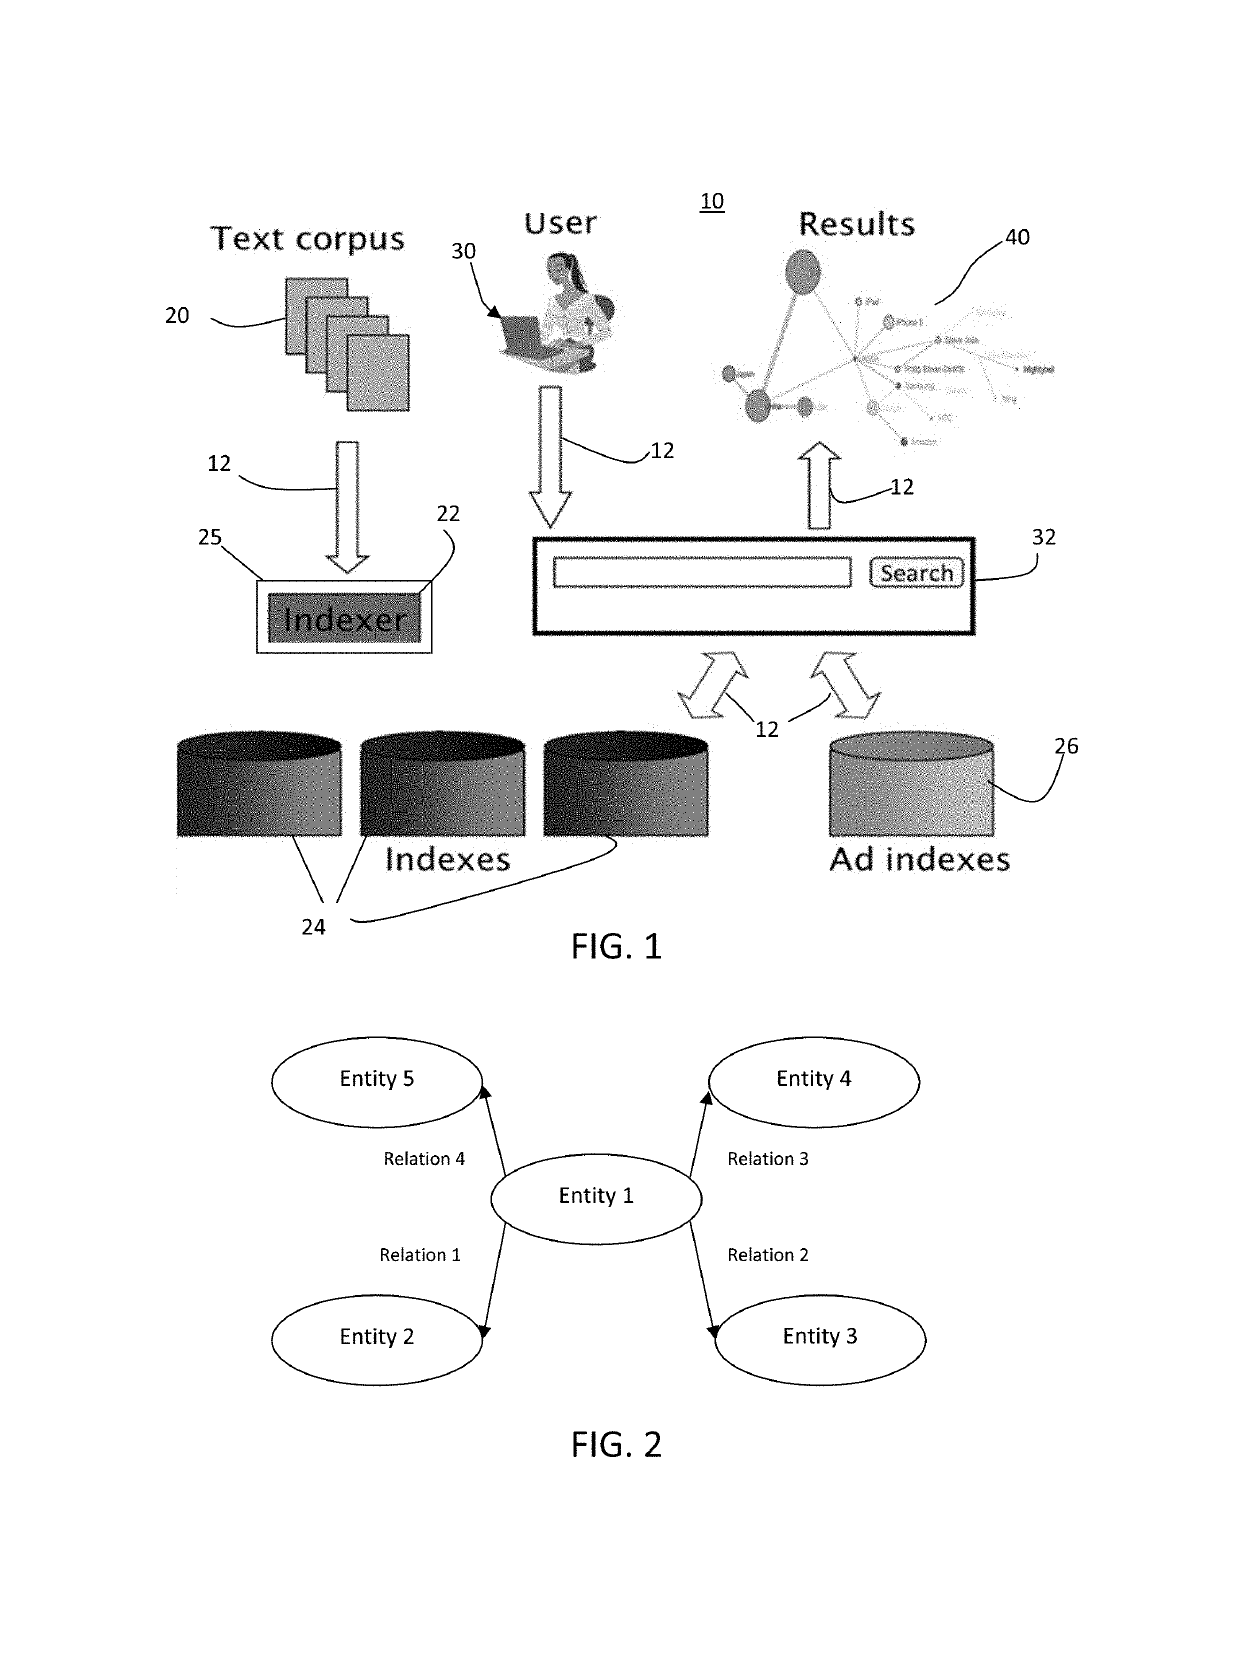 Systems and methods for providing a searchable concept network